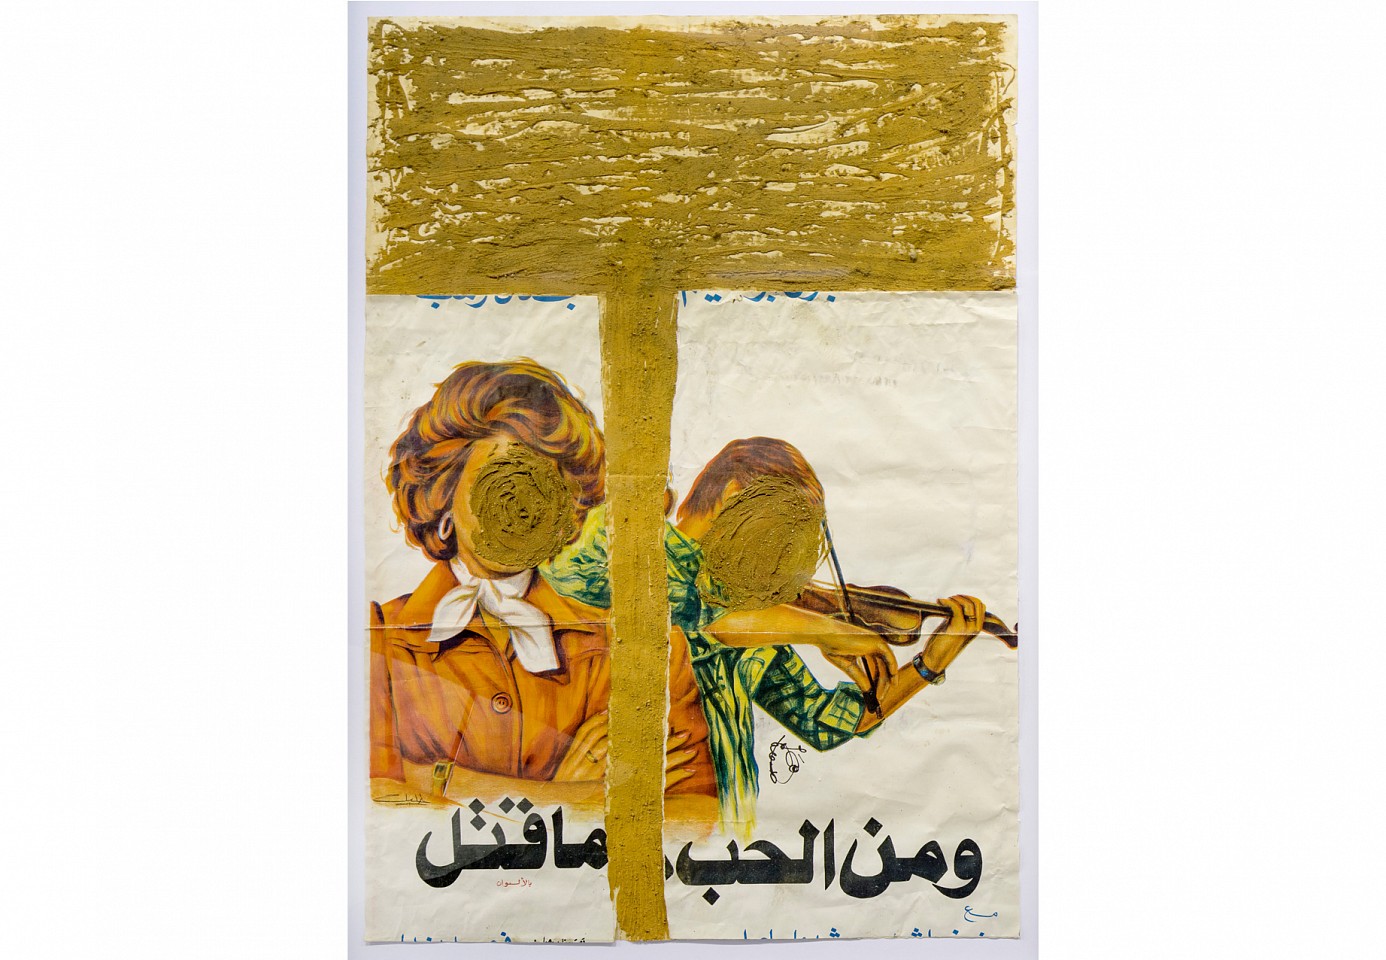 <p><span class="viewer-caption-artist">Ayman Yossri Daydban</span></p>
<p><span class="viewer-caption-title"><i>Love Kills from My Father Over The Tree series</i></span>, <span class="viewer-caption-year">2016</span></p>
<p><span class="viewer-caption-media">Silicone on vintage poster</span></p>
<p><span class="viewer-caption-dimensions">100 x 70 cm (39 5/16 x 27 1/2 in.)</span></p>
<p><span class="viewer-caption-inventory">AYD0575</span></p>
<p><span class="viewer-caption-aux"></span></p>